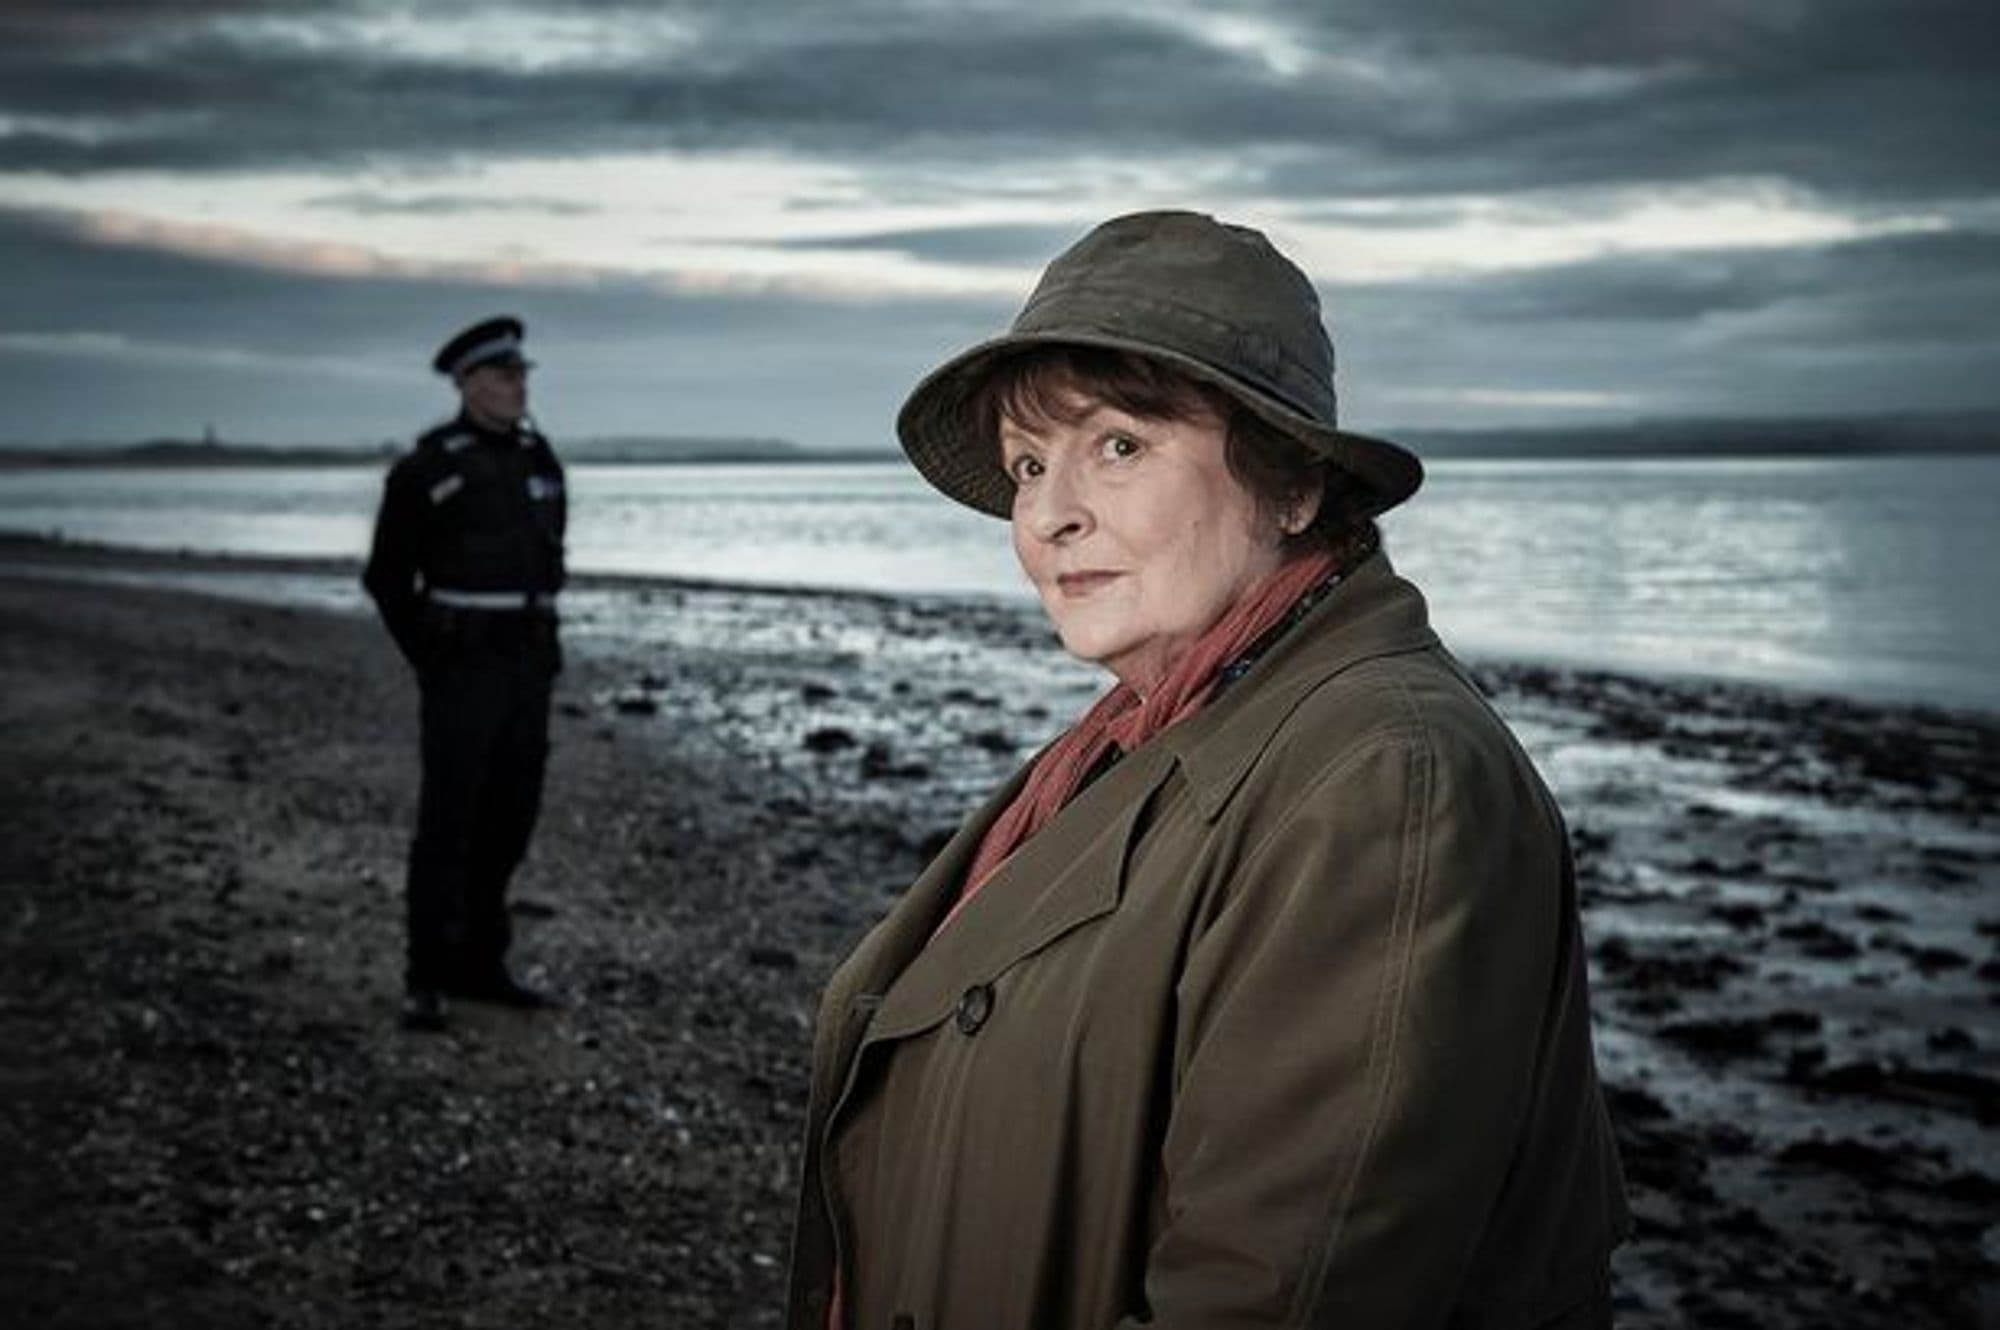 ### Title: Brenda Blethyn Bids Farewell to "Vera" After 13 Years: A Look Back at the Iconic Detective Series